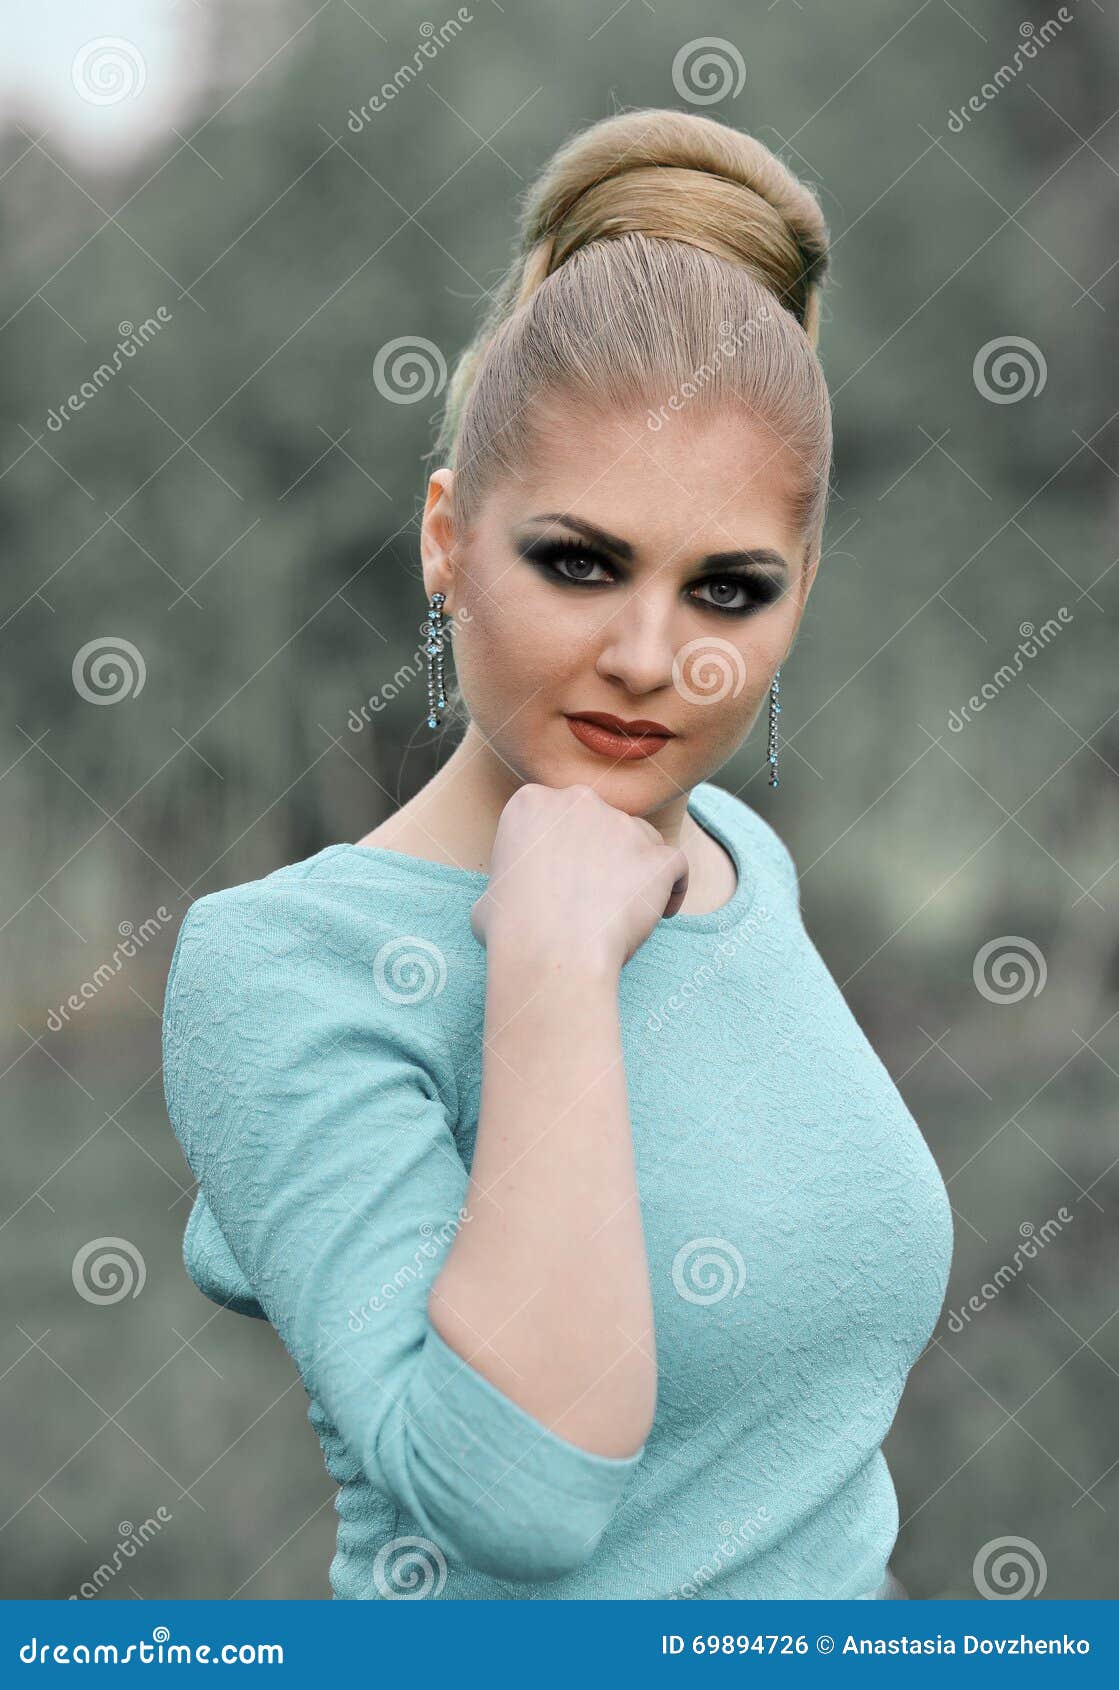 Fashionable Classic Glamorous Girl Model With Professional Makeup And Hairstyle Stock Photo Image Of Glamour Cosmetics